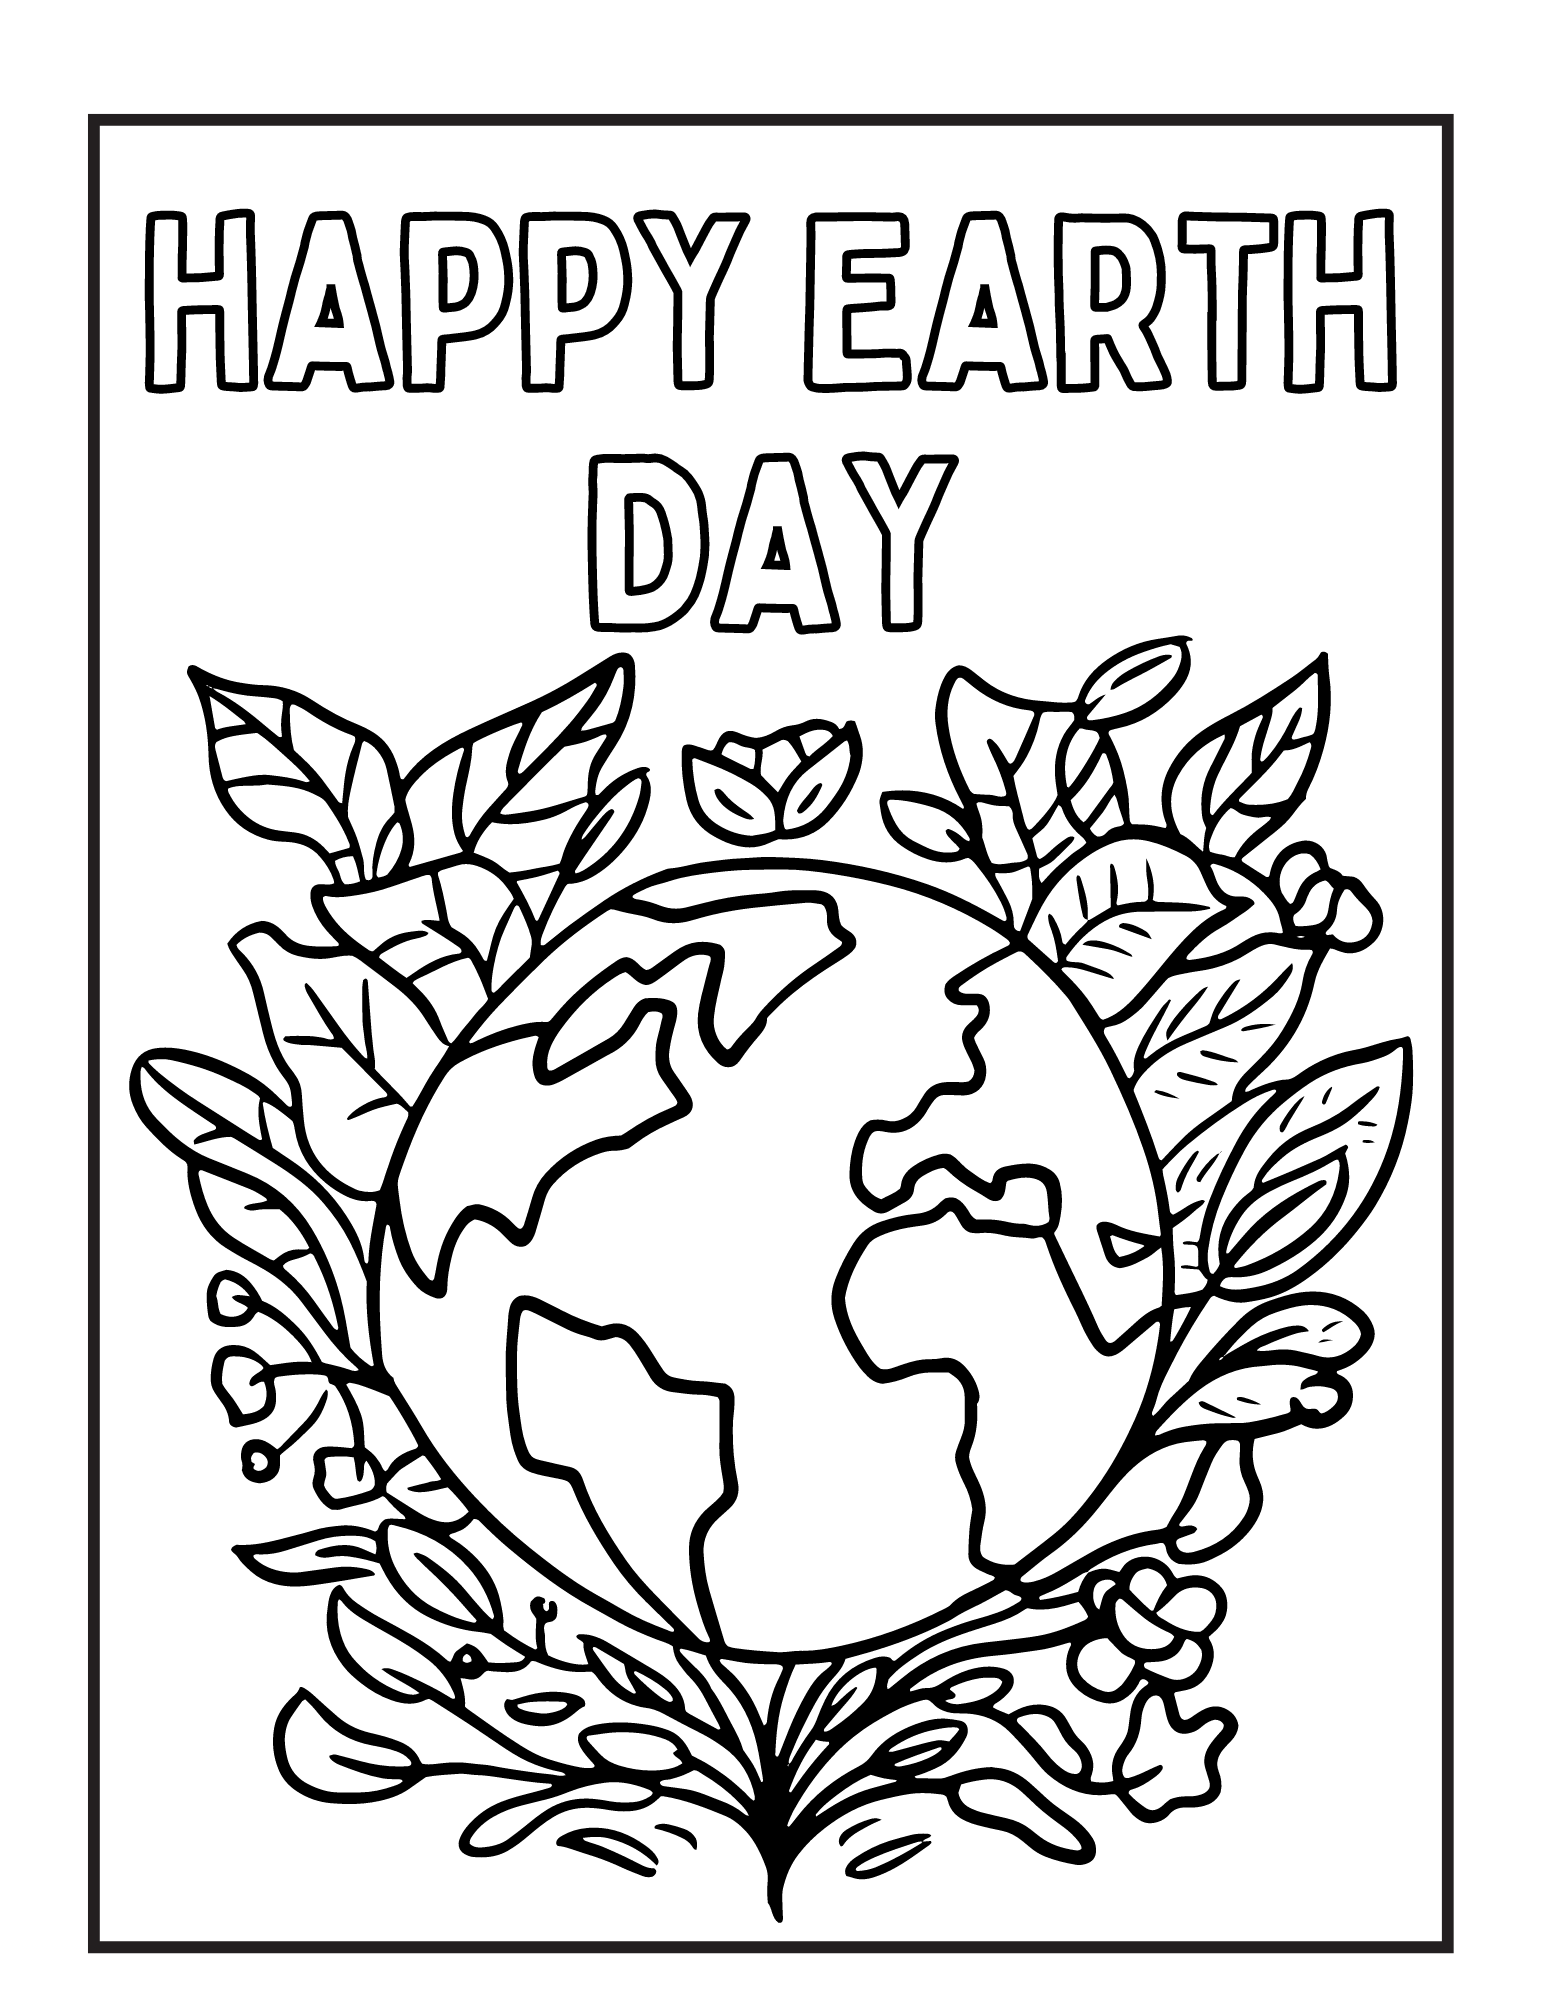 Happy earth day coloring sheets â